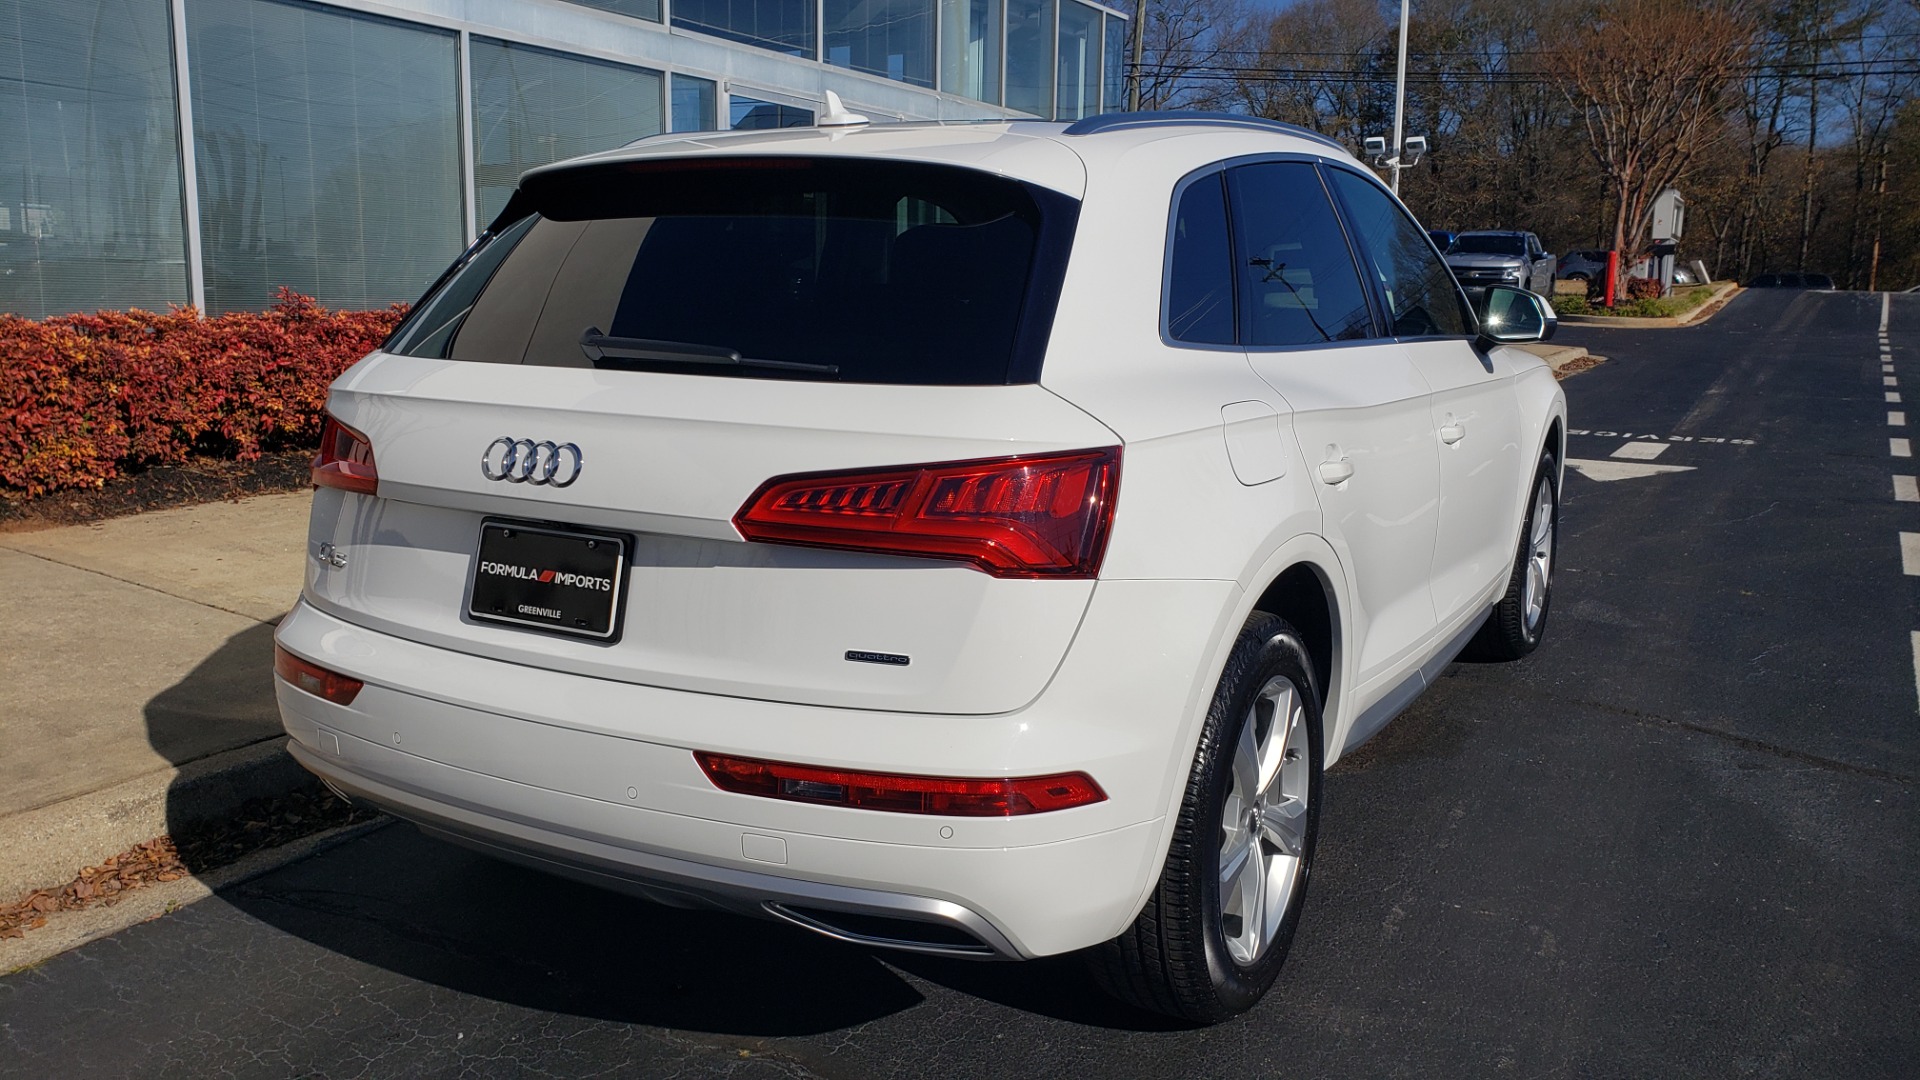 Used 2019 Audi Q5 PREMIUM PLUS 2.0L / AWD / NAV / PANO-ROOF / DRVR ASST / REARVIEW for sale $38,795 at Formula Imports in Charlotte NC 28227 8